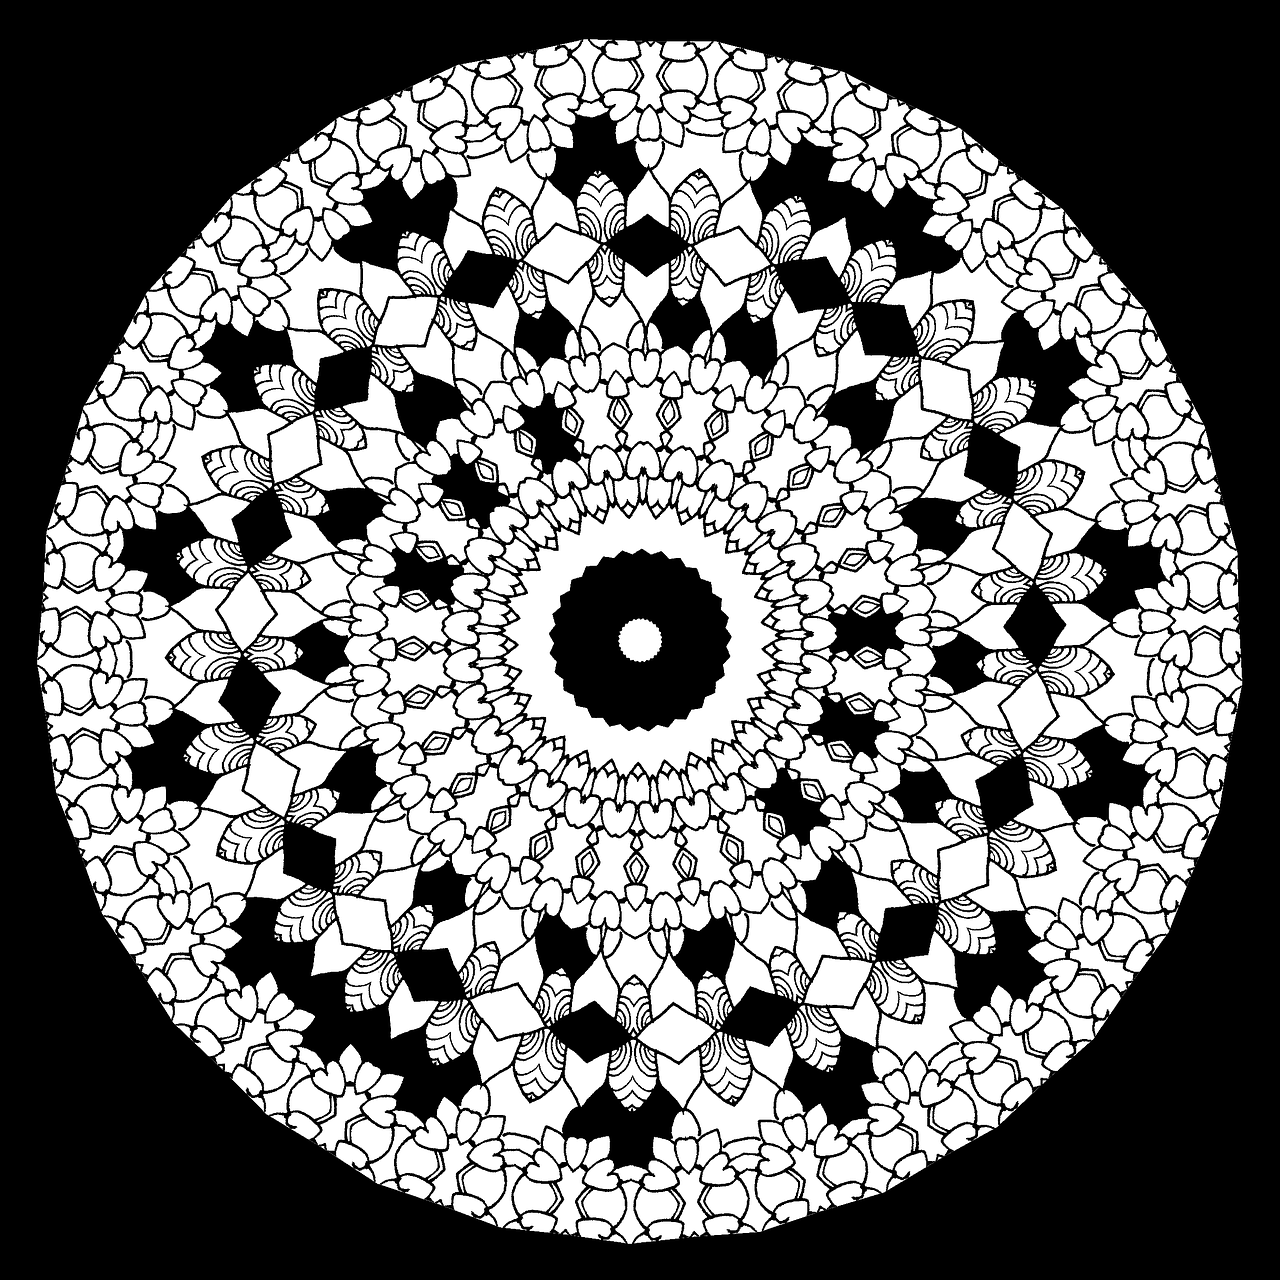 a black and white circular design on a black background, a raytraced image, inspired by Benoit B. Mandelbrot, reddit, persian folkore artstyle, hexagonal, palm pattern visible, porcelain forcefield